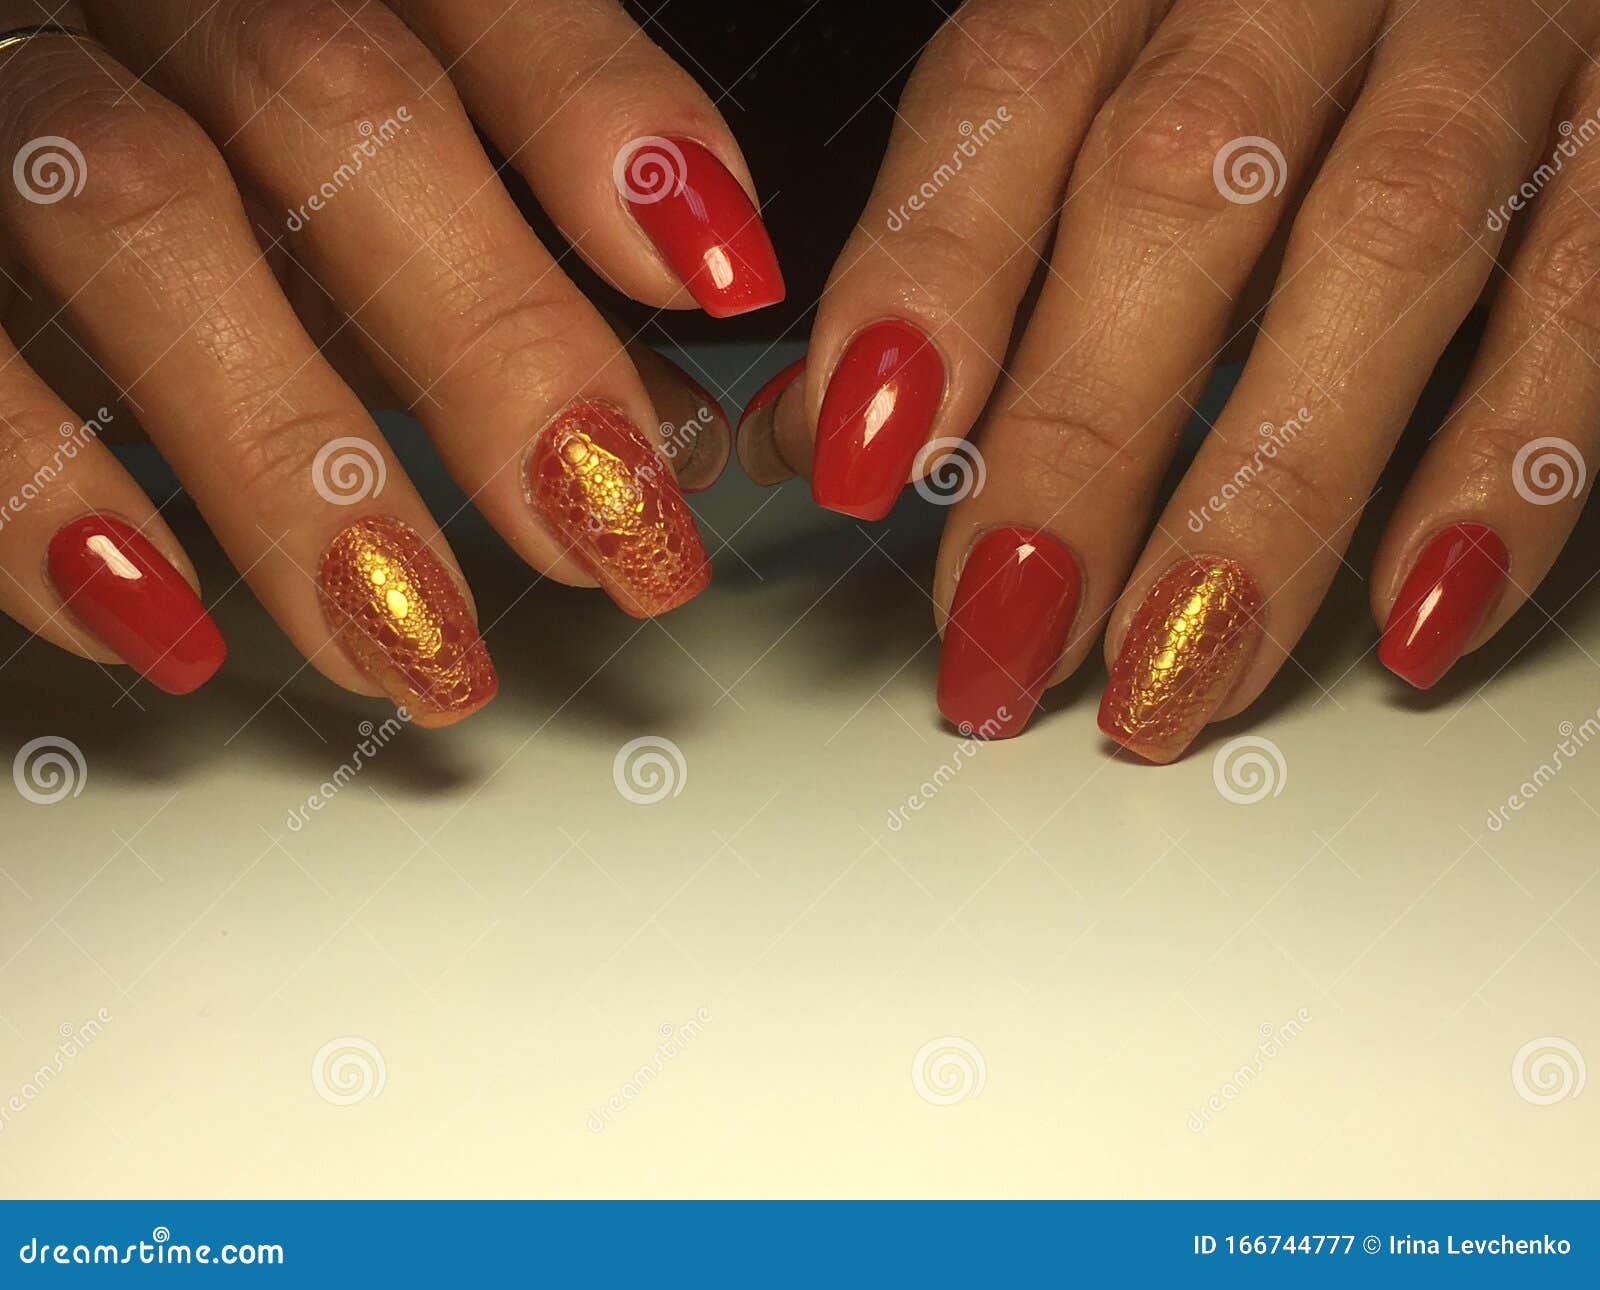 Site Name For Sale | Rhinestone nails, Bling nails, Nail designs